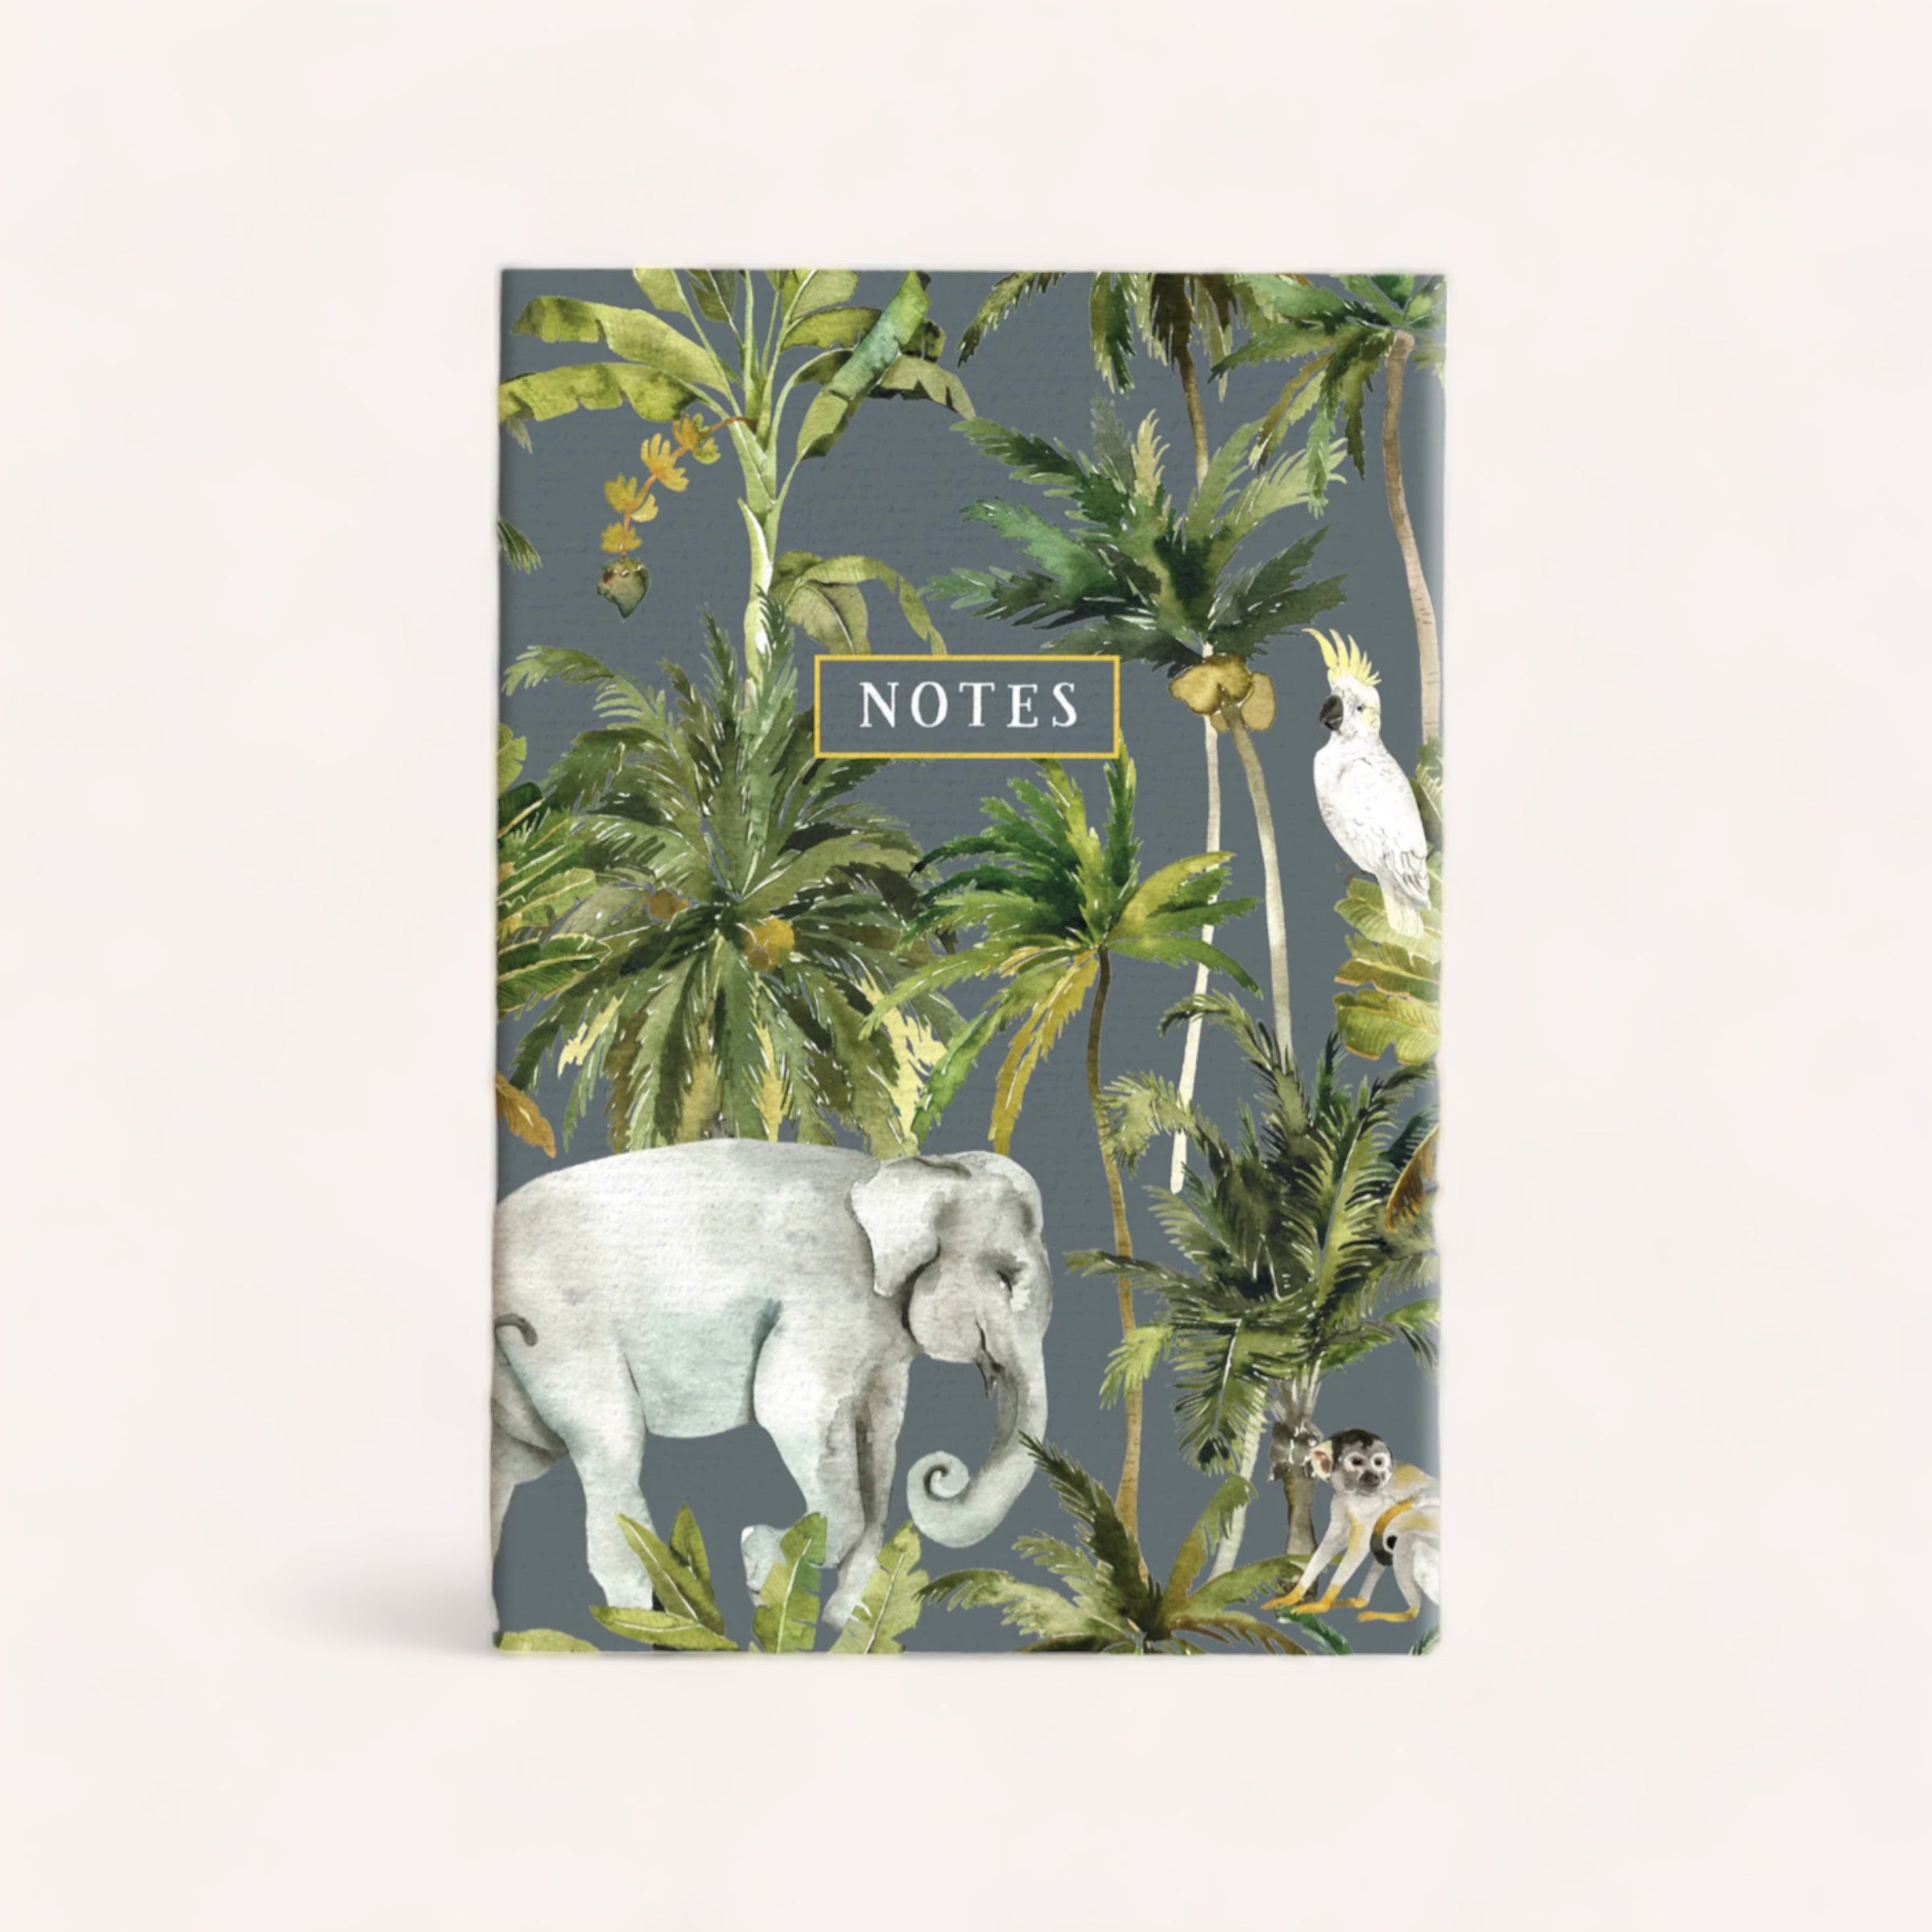 An elegant Jungle Notebook with a tropical jungle theme, featuring illustrations of an elephant, parrot, and monkey among lush greenery from Ink Bomb.